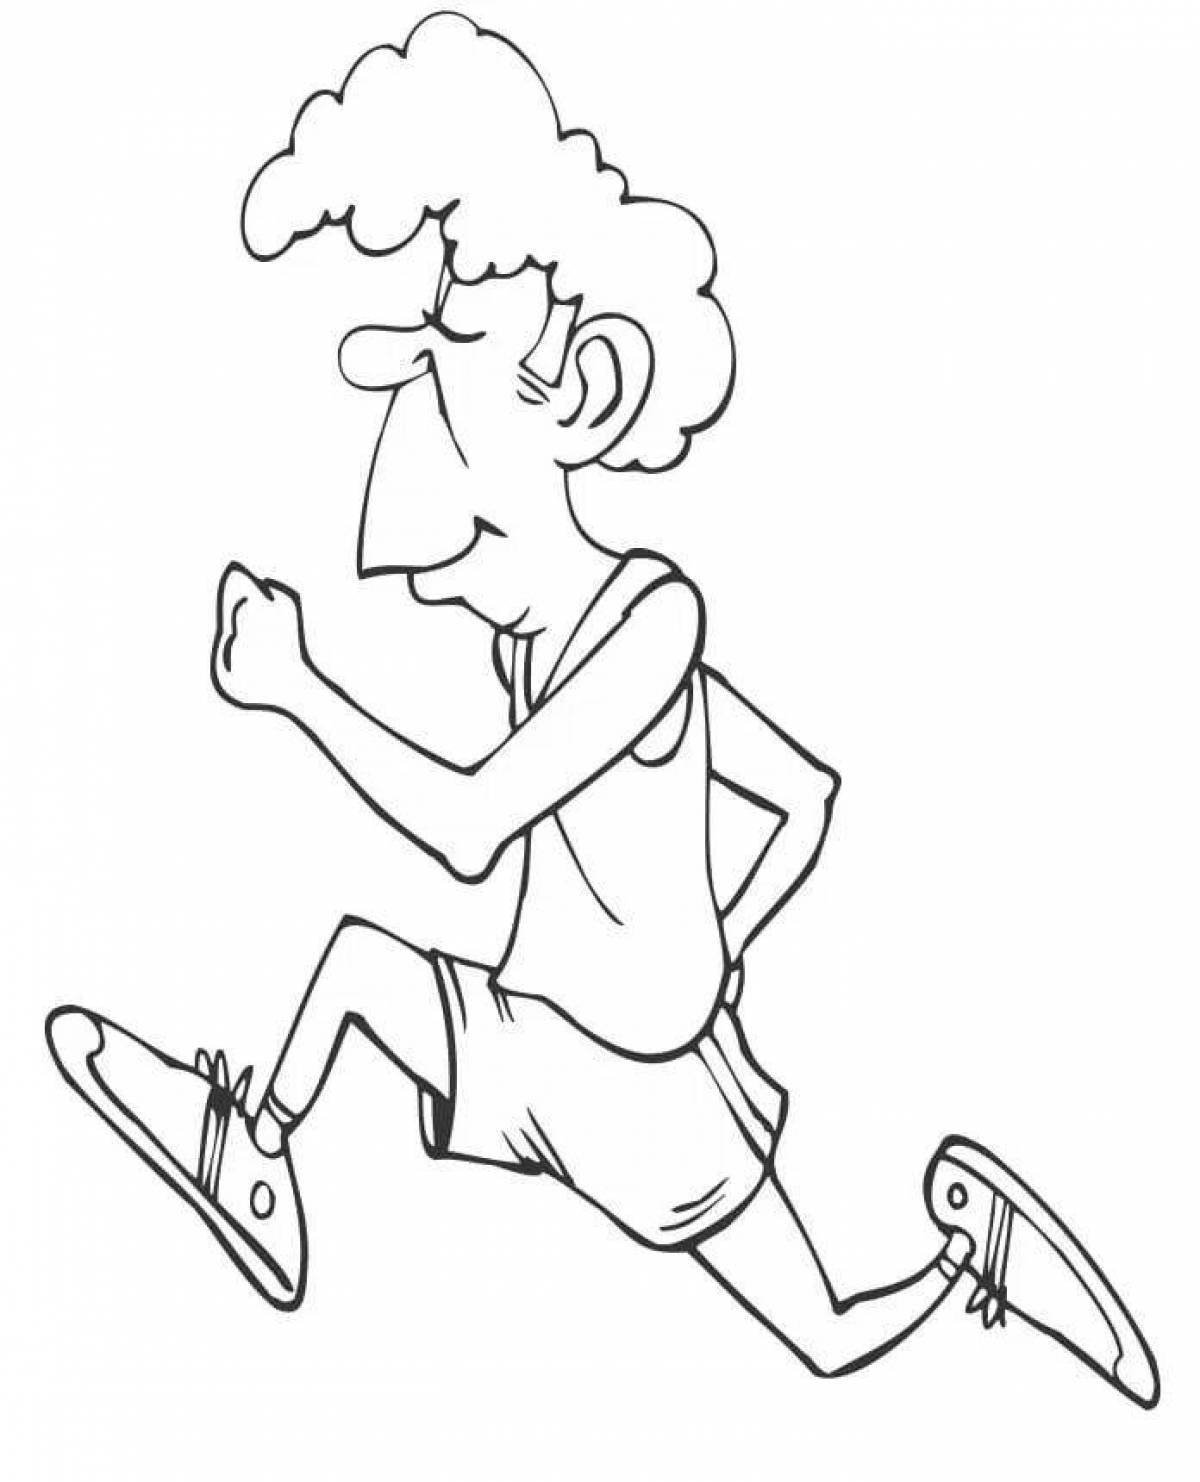 Playful run coloring page